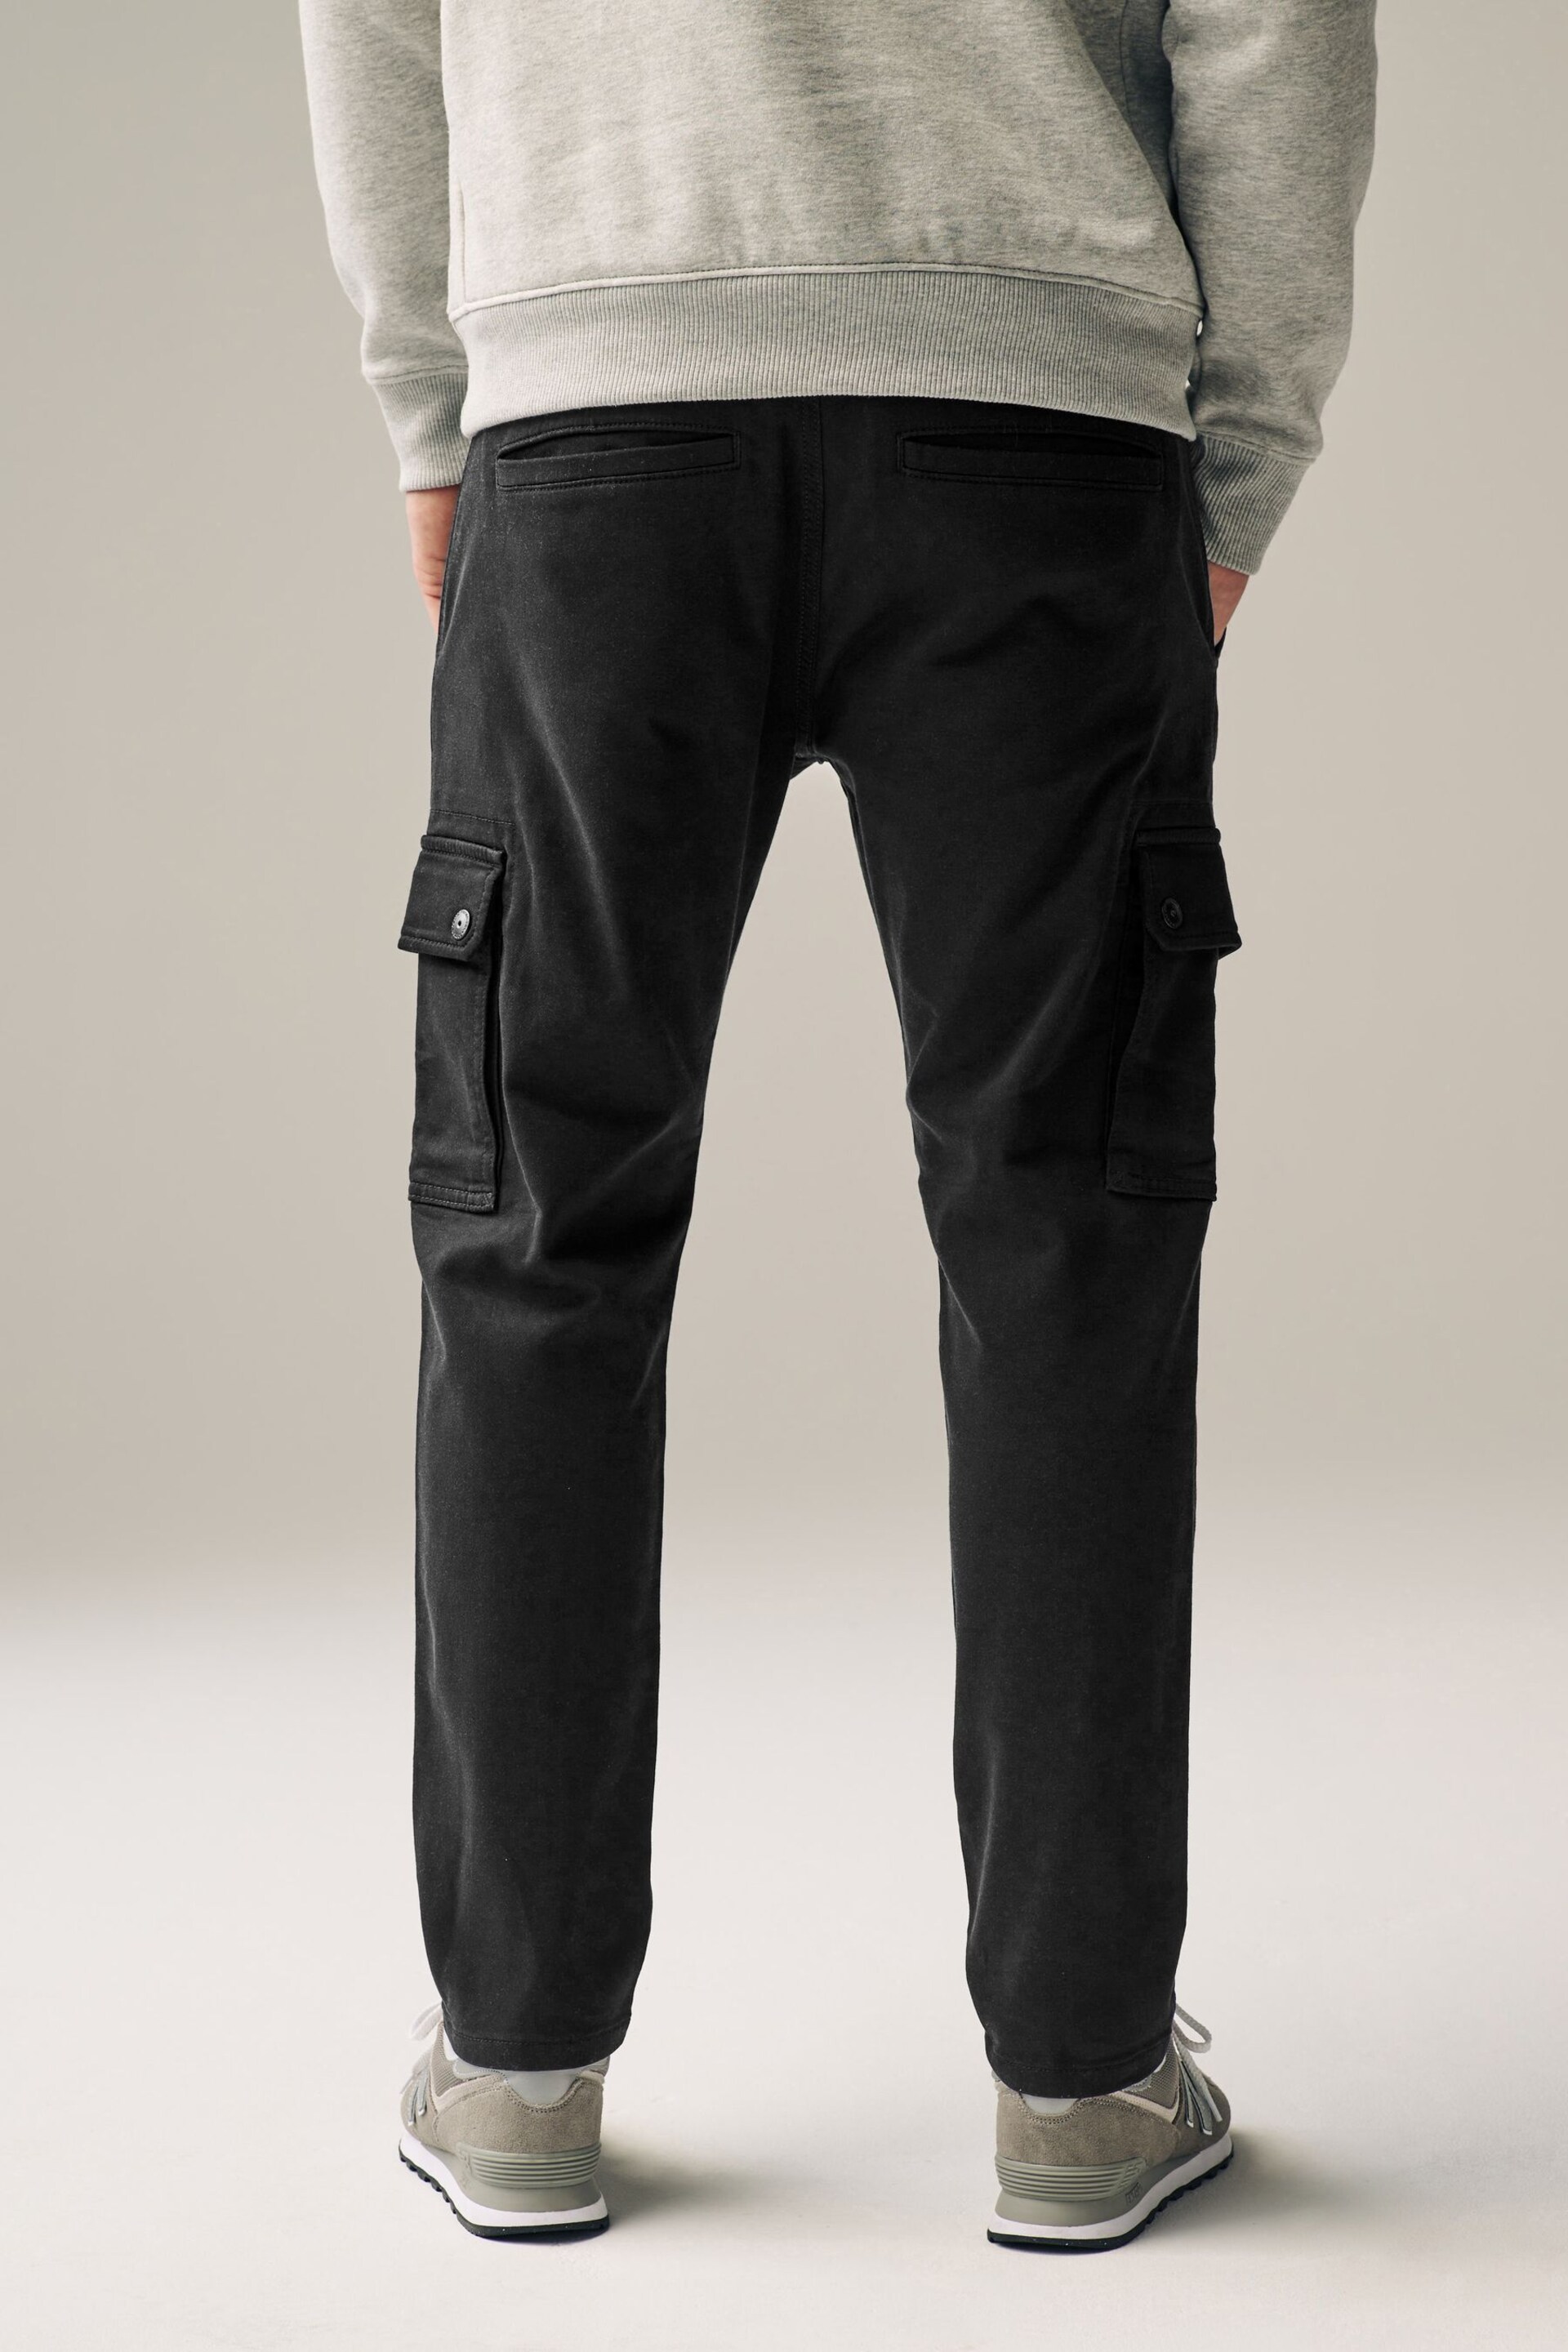 Black Motionflex Cargo Trousers - Image 5 of 10